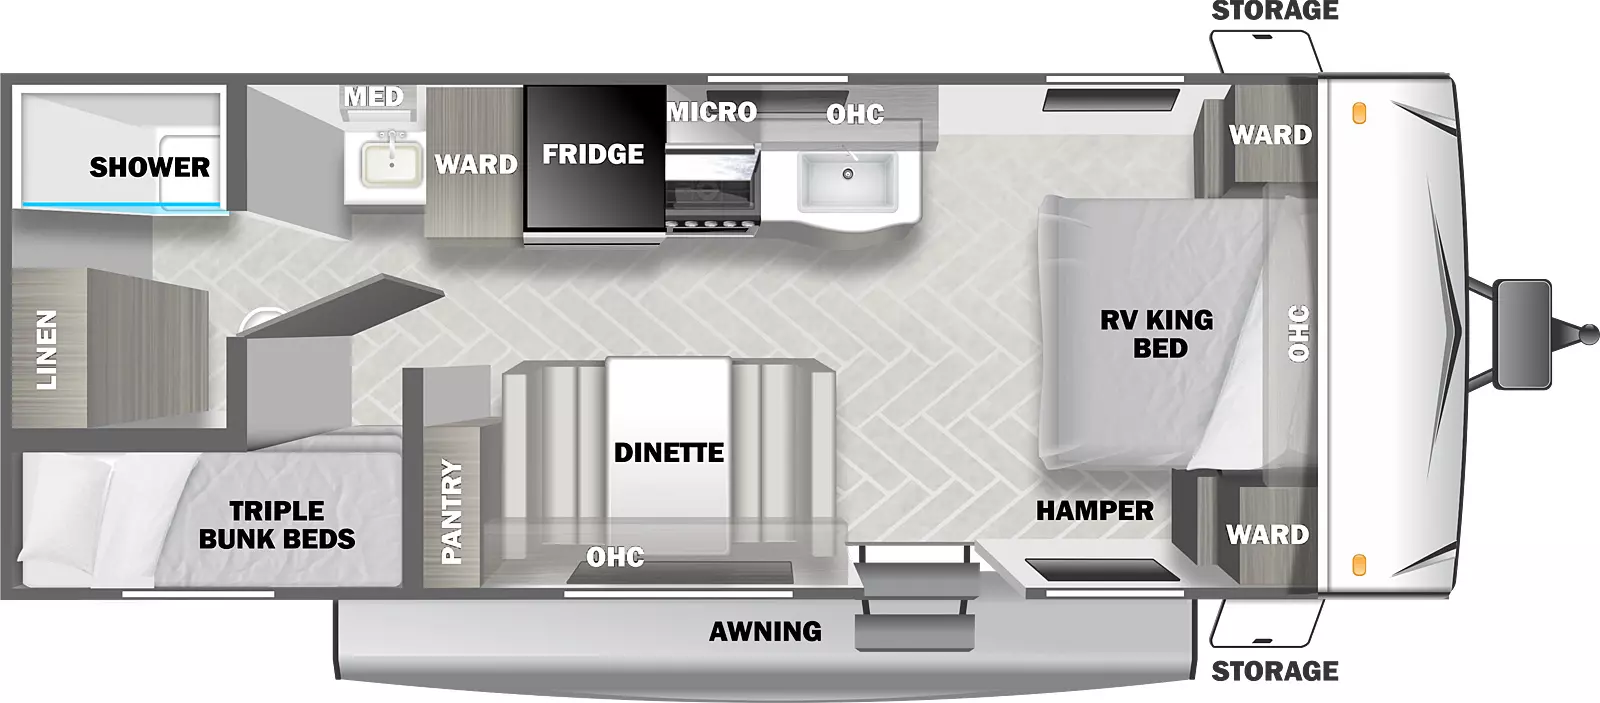 The T2250 has zero slideouts and one entry. Exterior features front storage, and an awning. Interior layout front to back: RV king bed with overhead cabinet, wardrobes on each side, and hamper on door side; off-door side kitchen counter with sink, overhead cabinet, microwave, cooktop, refrigerator, wardrobe, and bathroom sink with medicine cabinet; door side entry, dinette with overhead cabinet, and pantry; rear off-door side bathroom with shower, toilet, and linen closet only; rear door side triple bunk beds.